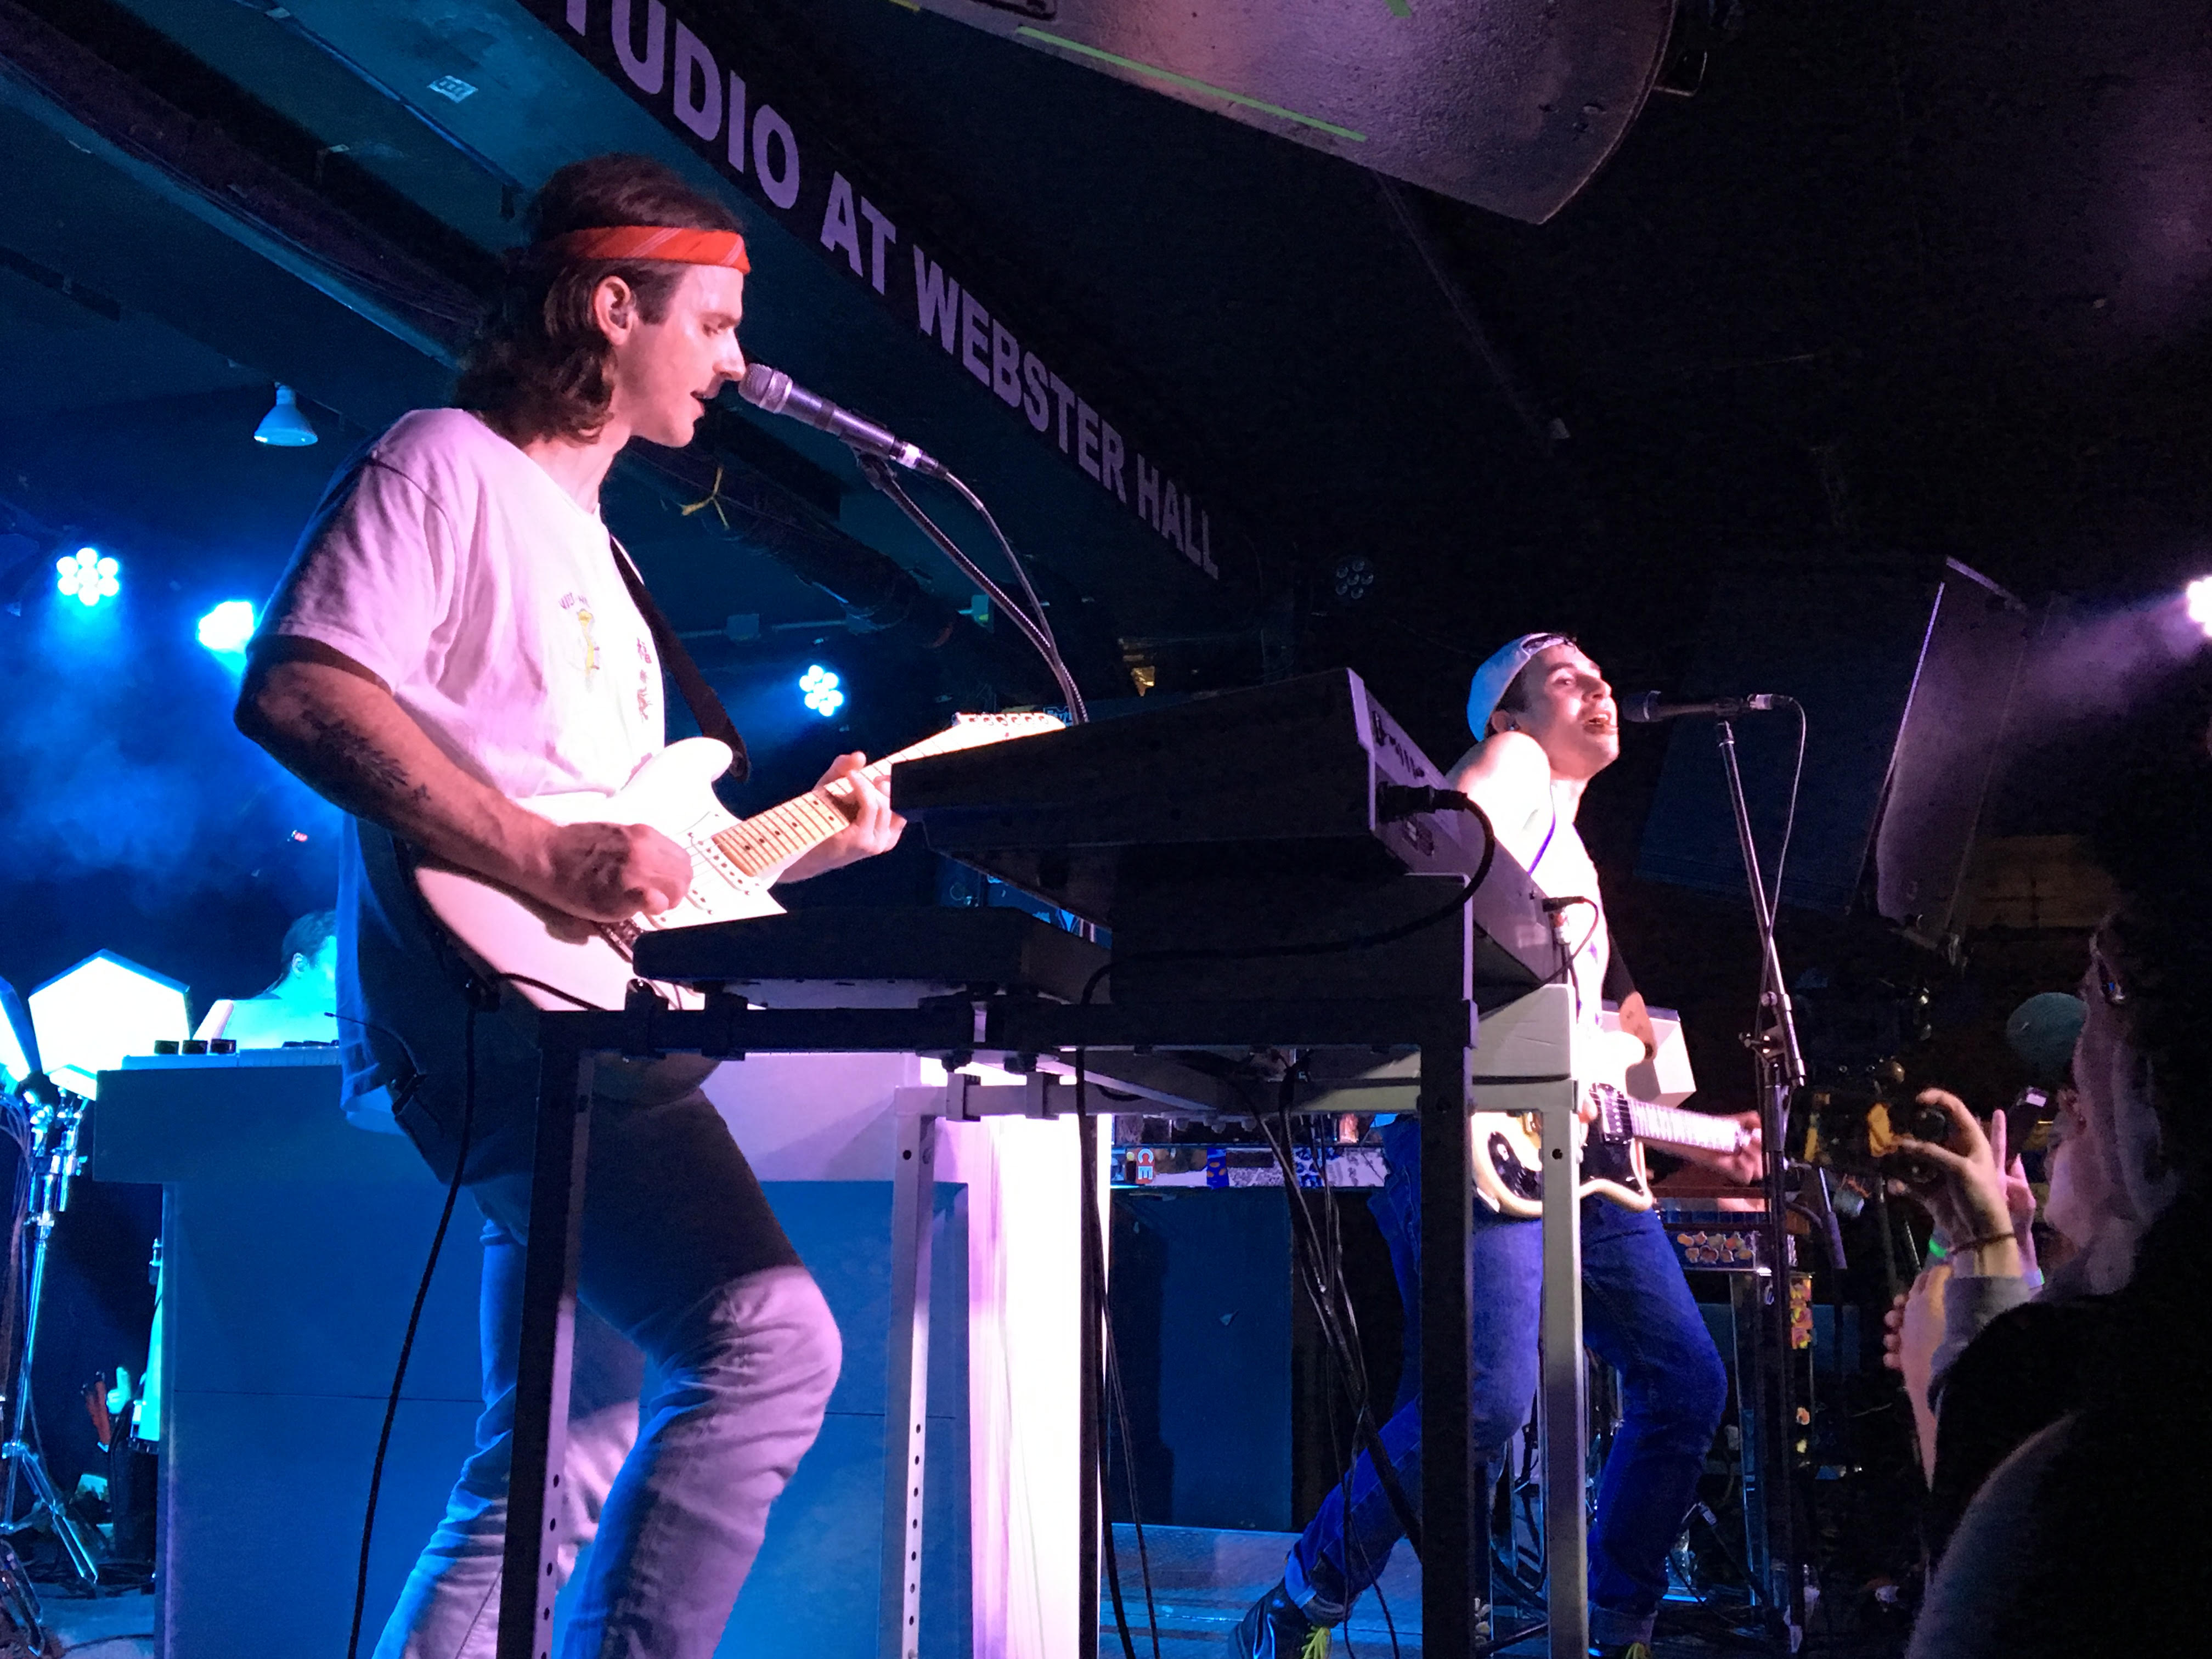 Bleachers Had Fans in a Trance at Webster Hall